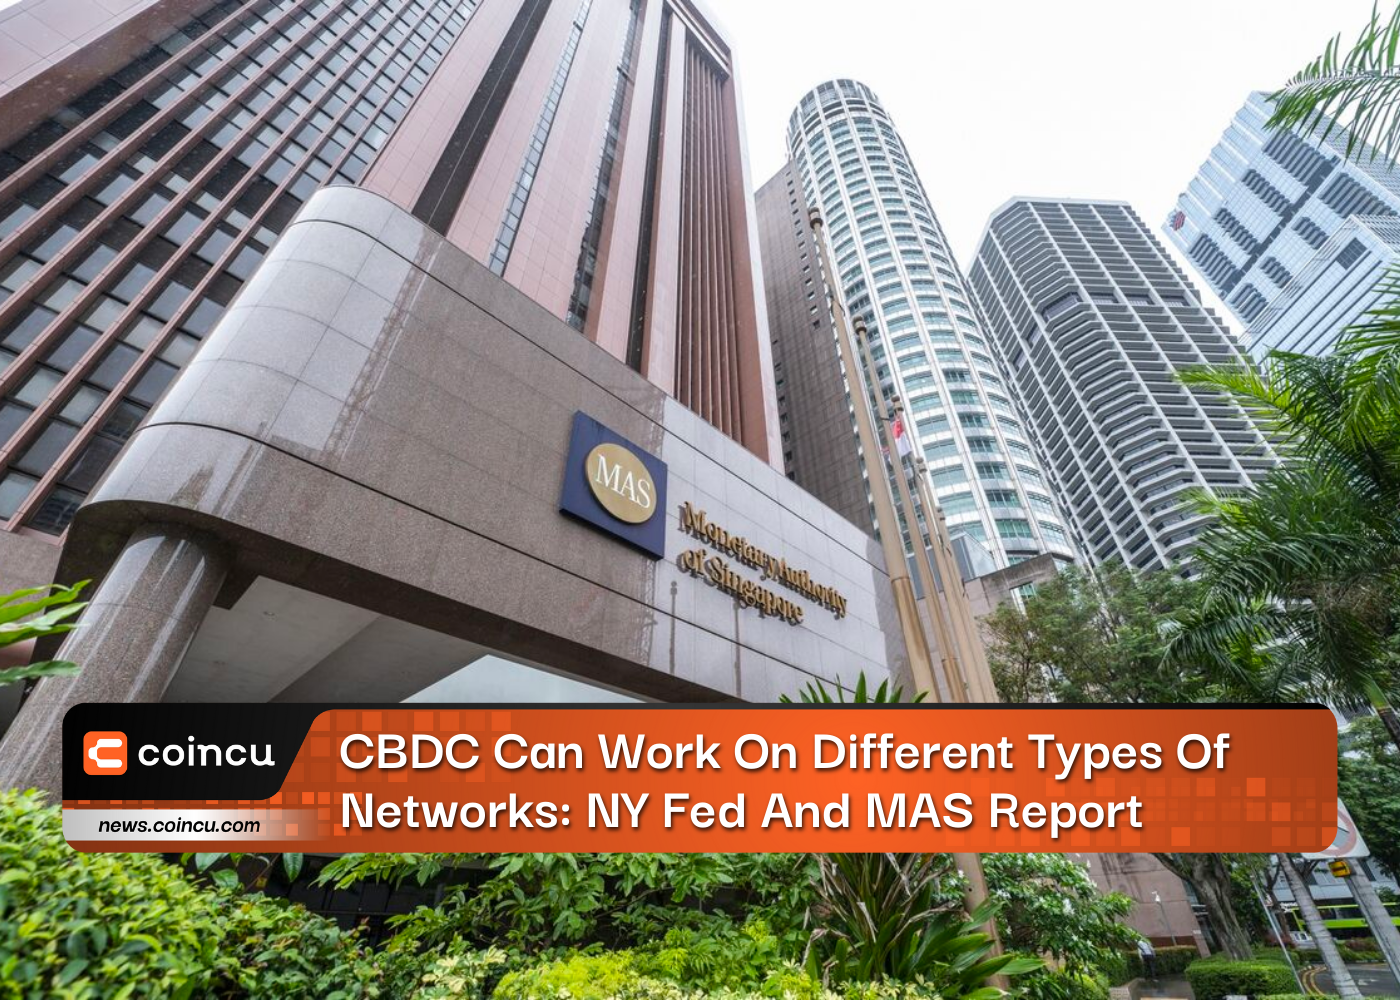 CBDC Can Work On Different Types Of Networks: NY Fed And MAS Report